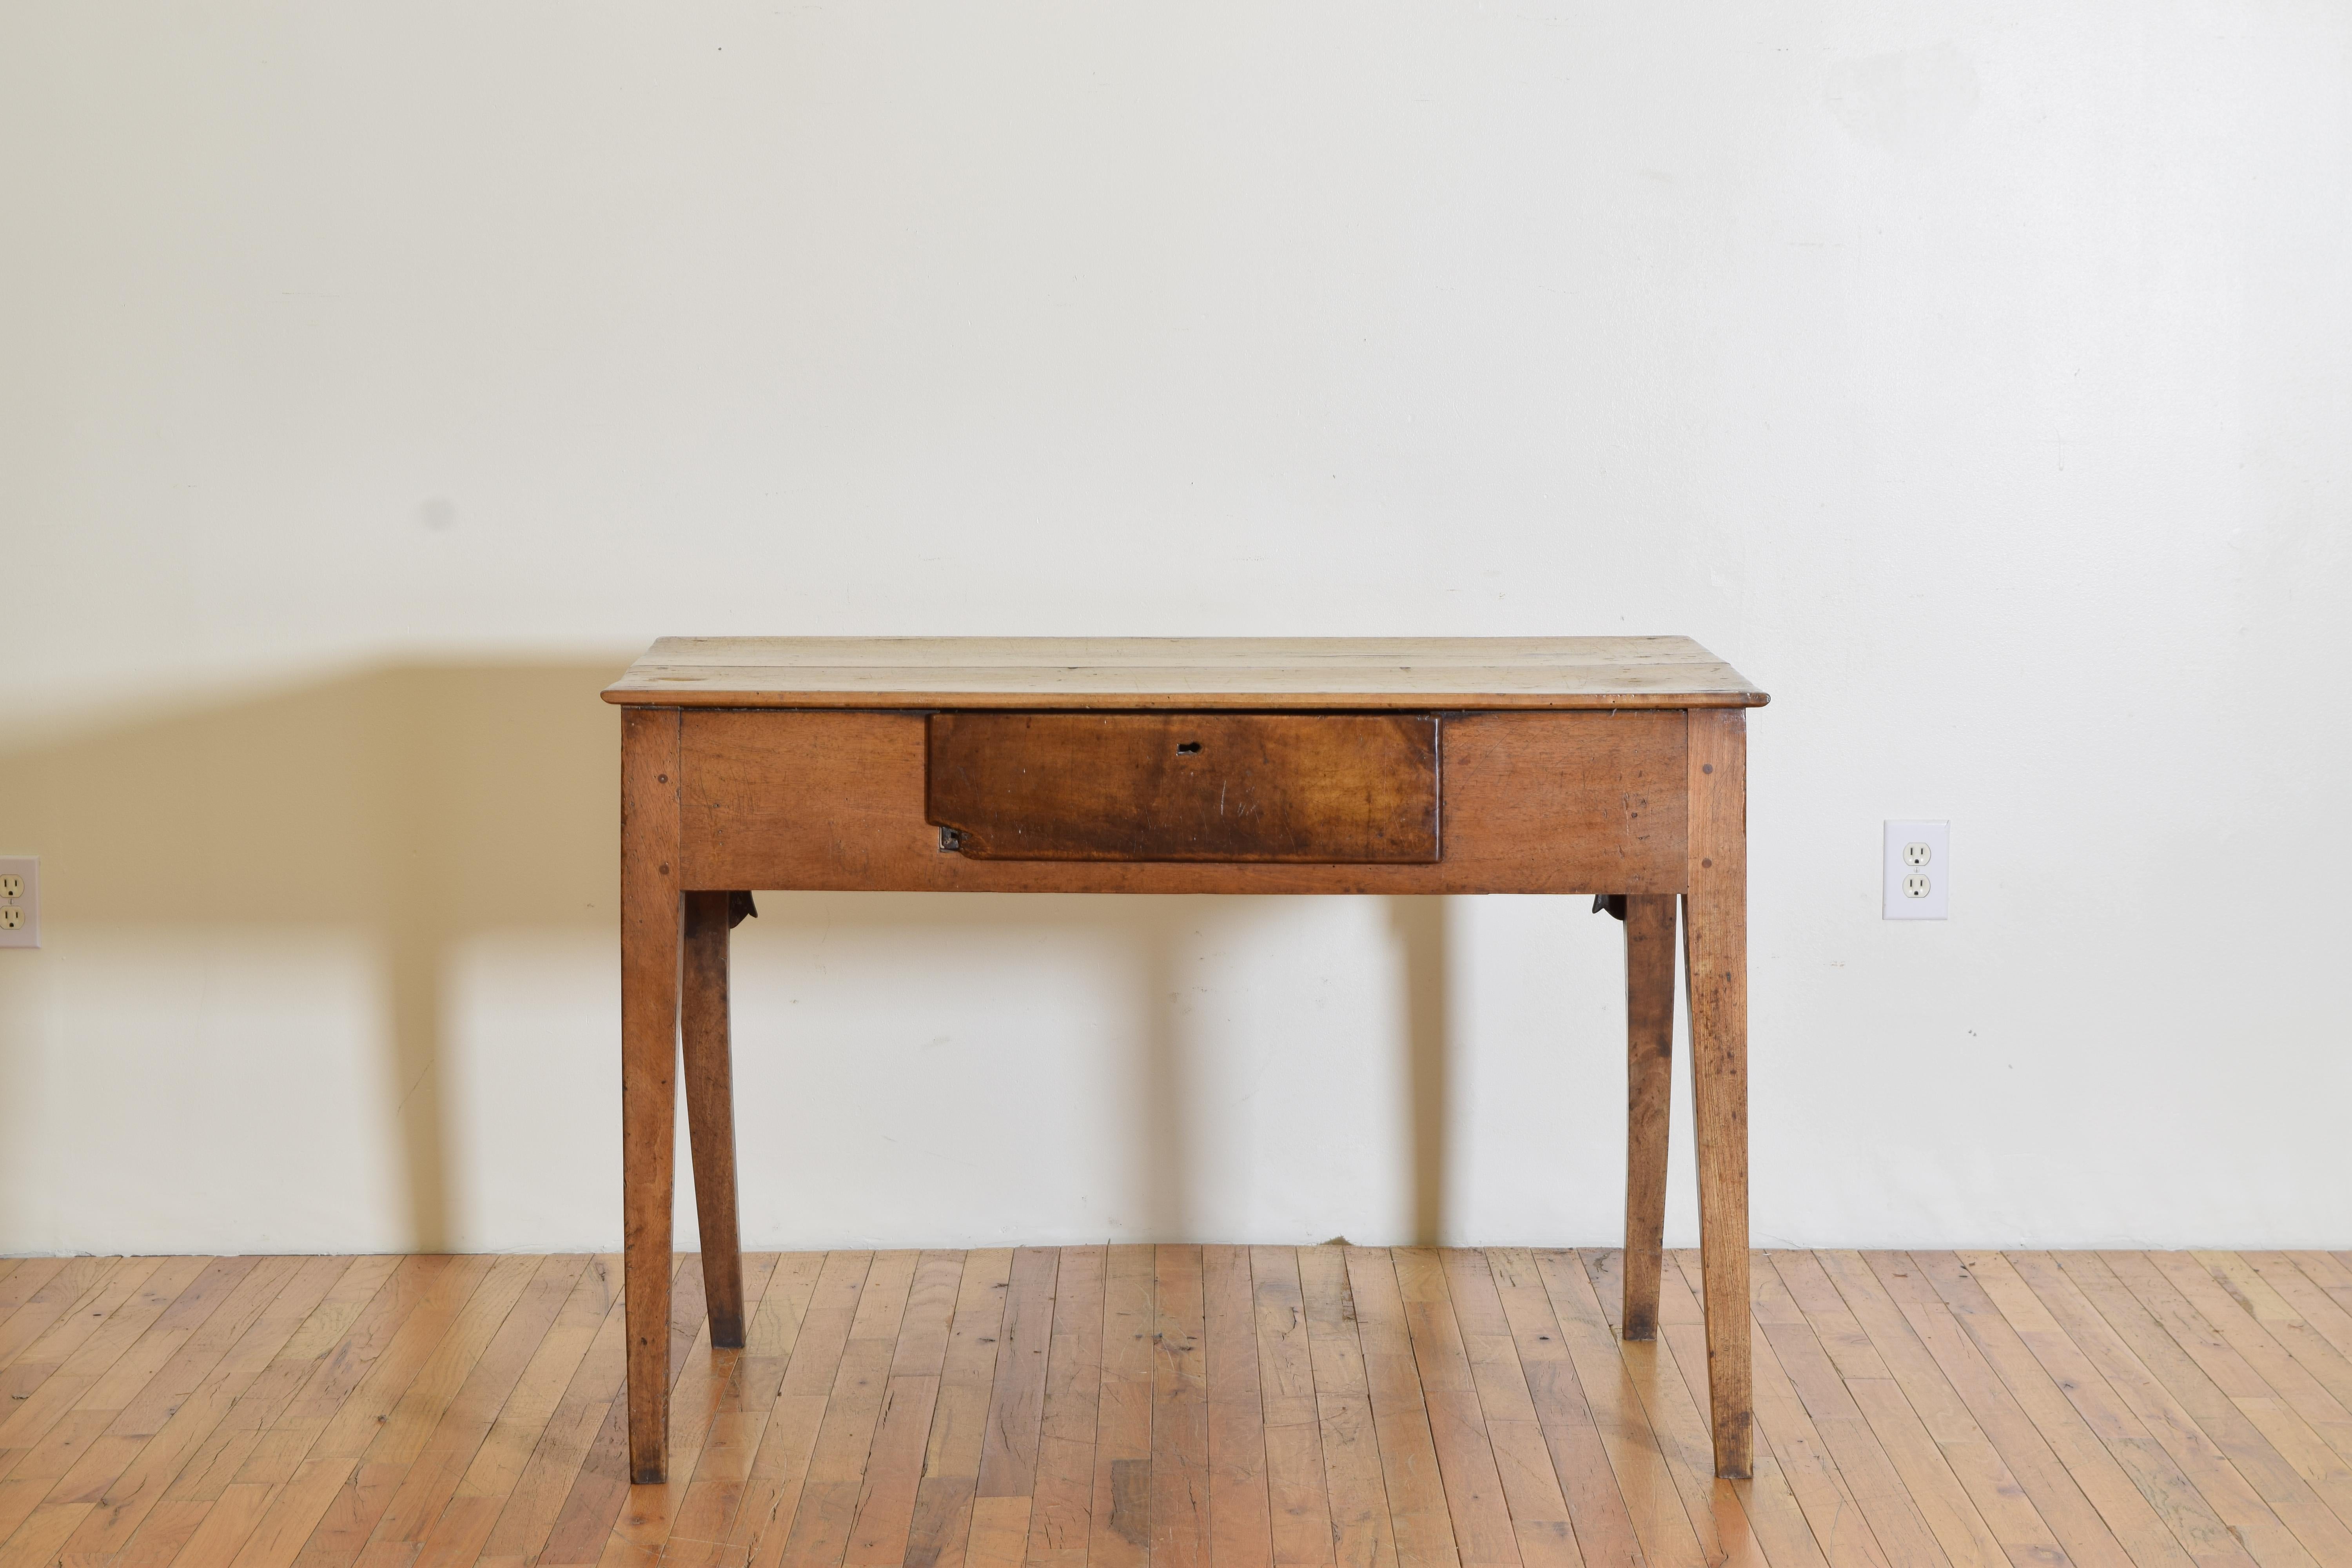 Neoclassical Spanish Rustic Neoclassic Faded Walnut 1-Drawer Table, early 19th century For Sale